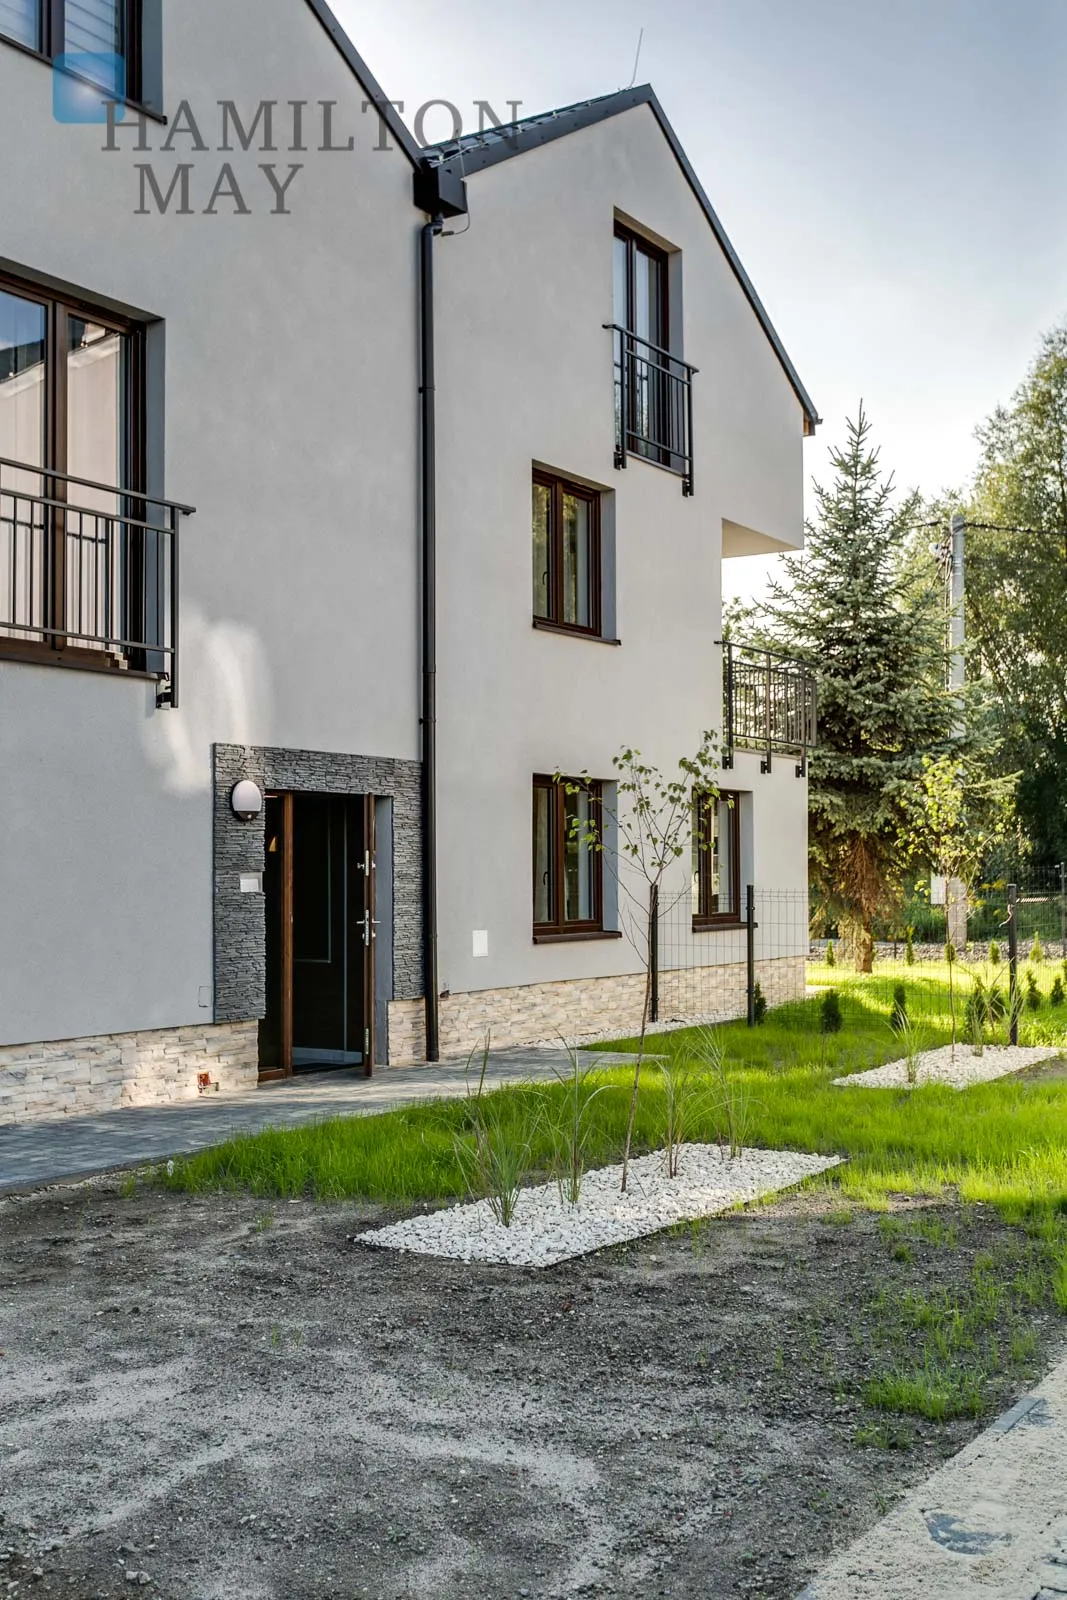 A two bedroom apartment with a large garden (100m2) in Wola Justowska, in the new Wola Exclusive Apartments investment